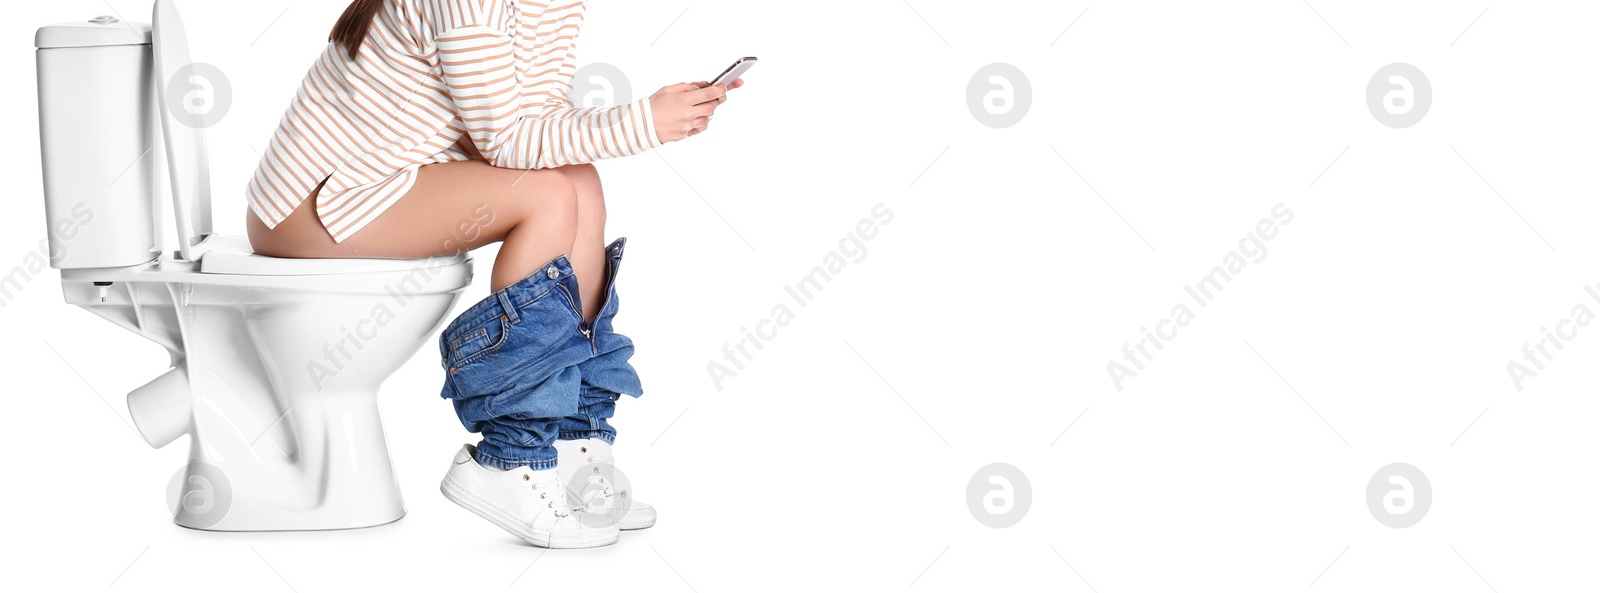 Image of Closeup view of woman with smartphone sitting on toilet bowl, white background. Banner design